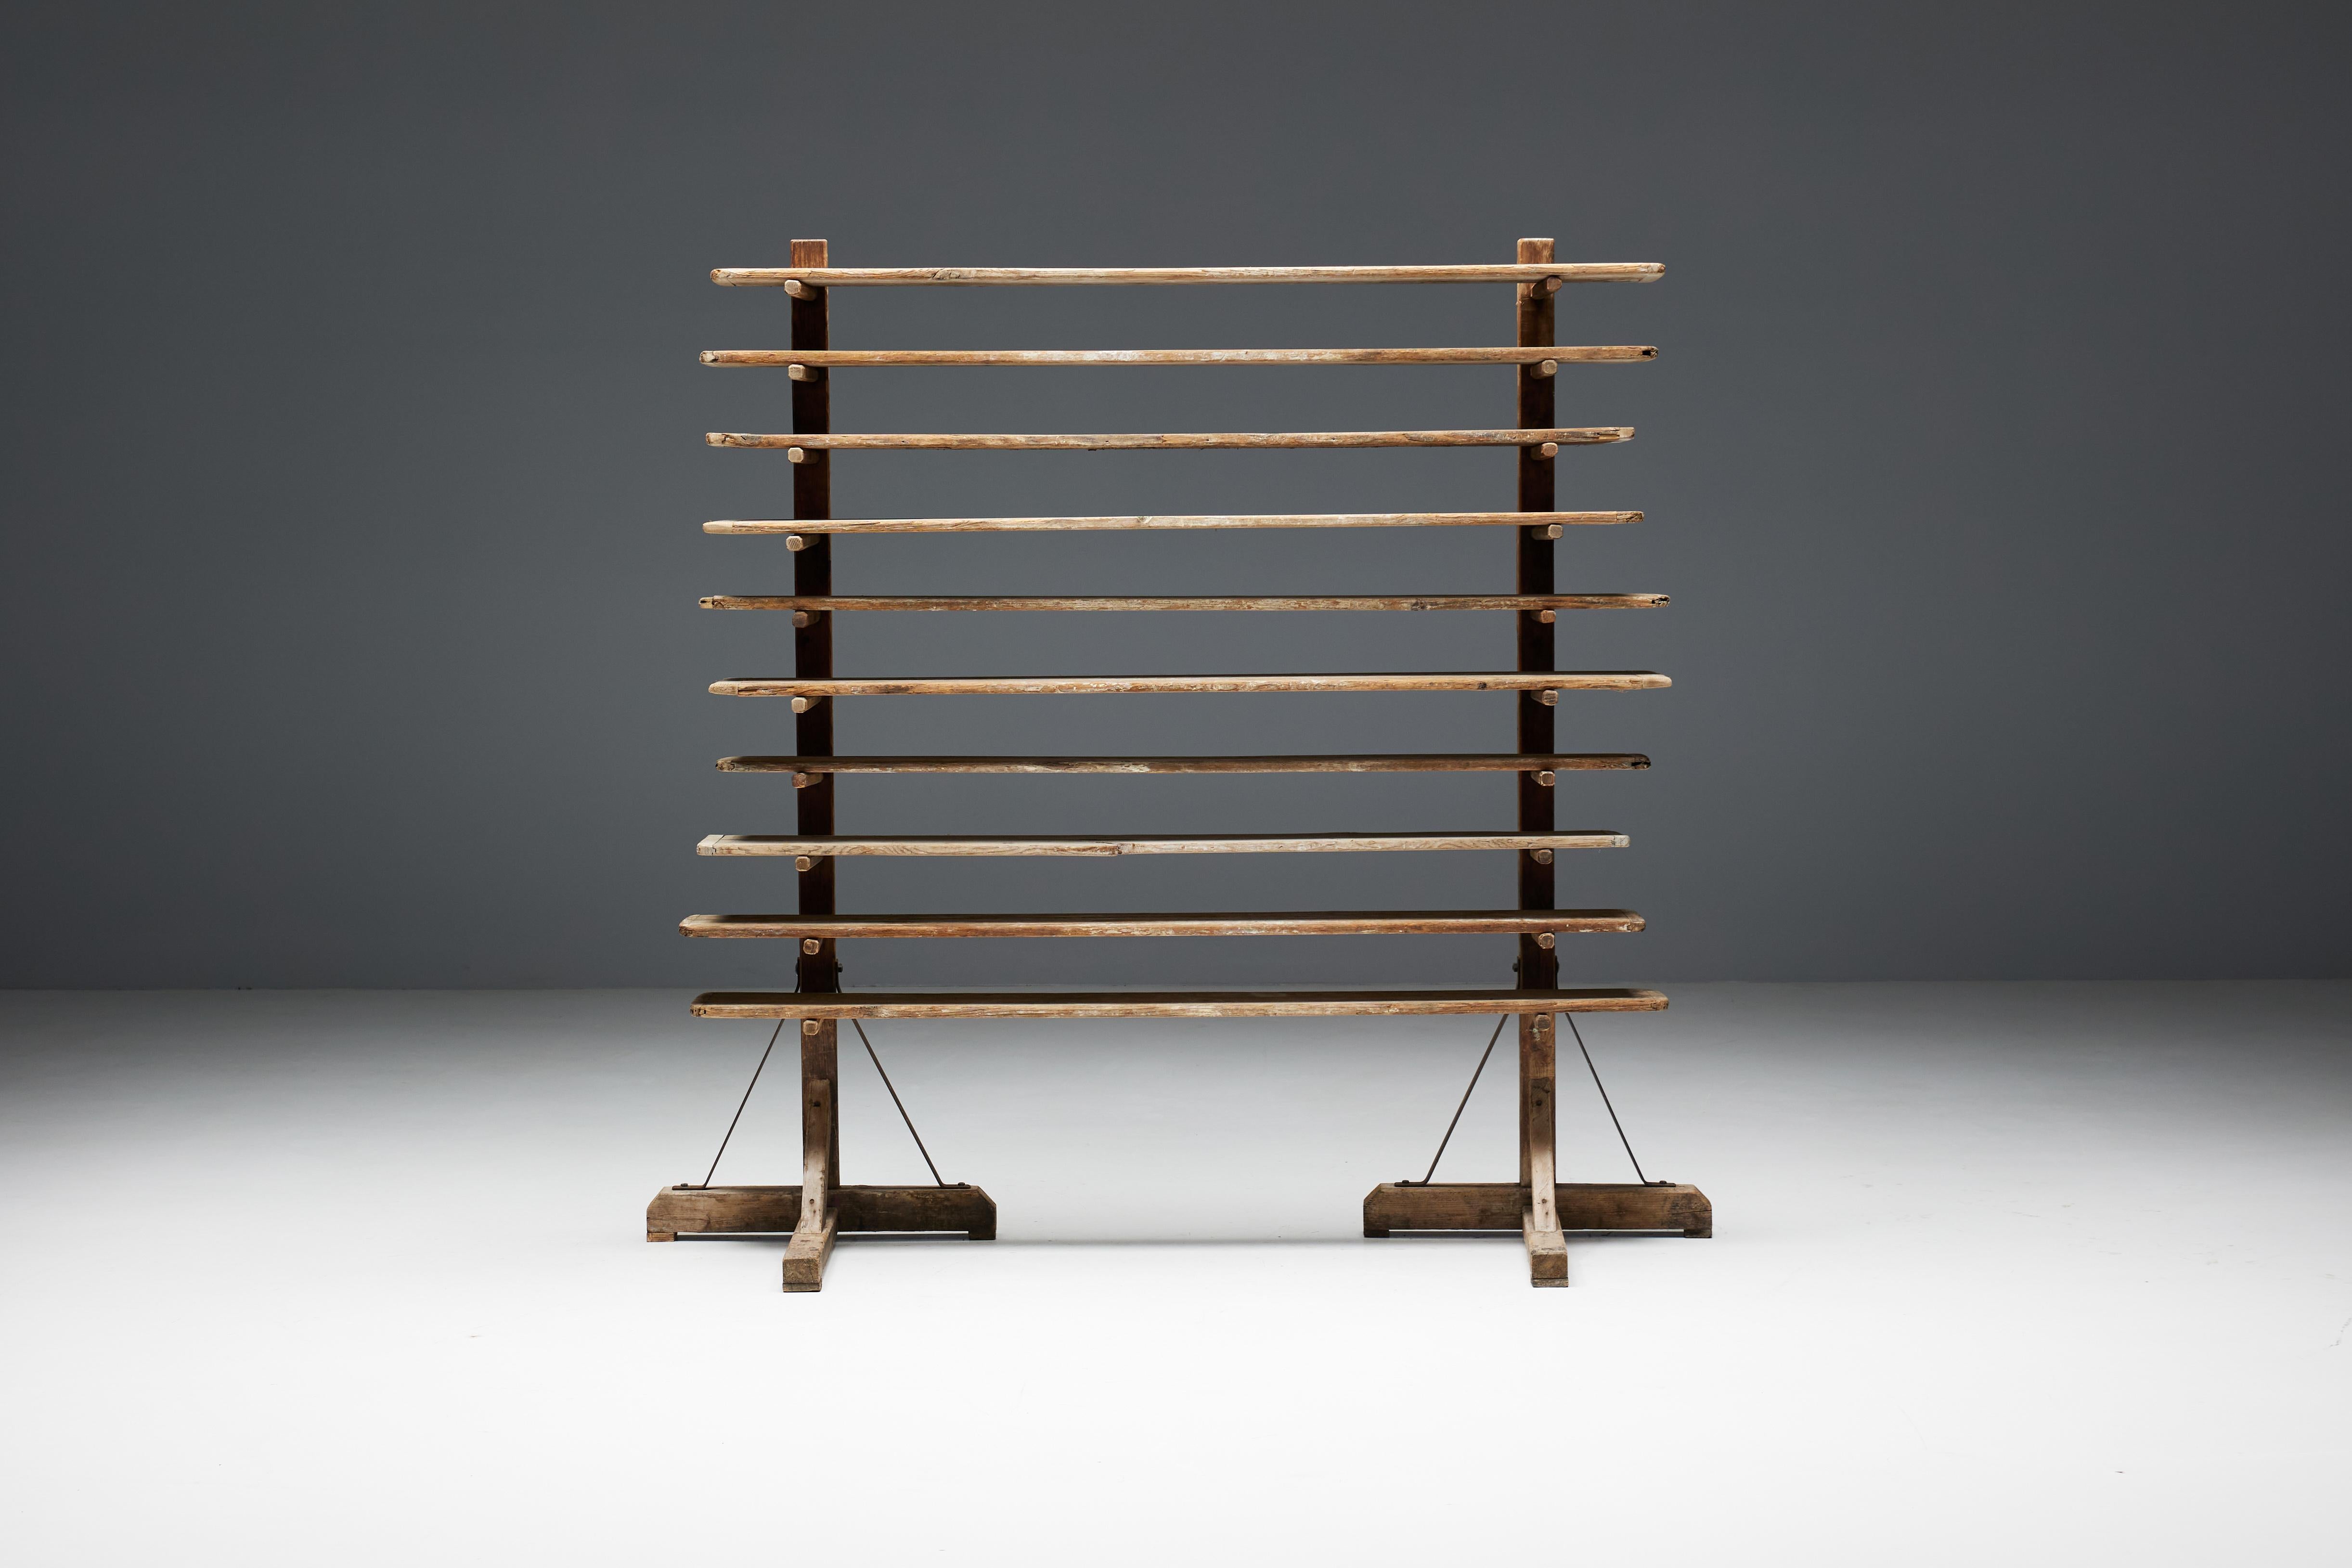 Rustic Folk Art Bakery Rack, France, 19th Century In Good Condition For Sale In Antwerp, BE